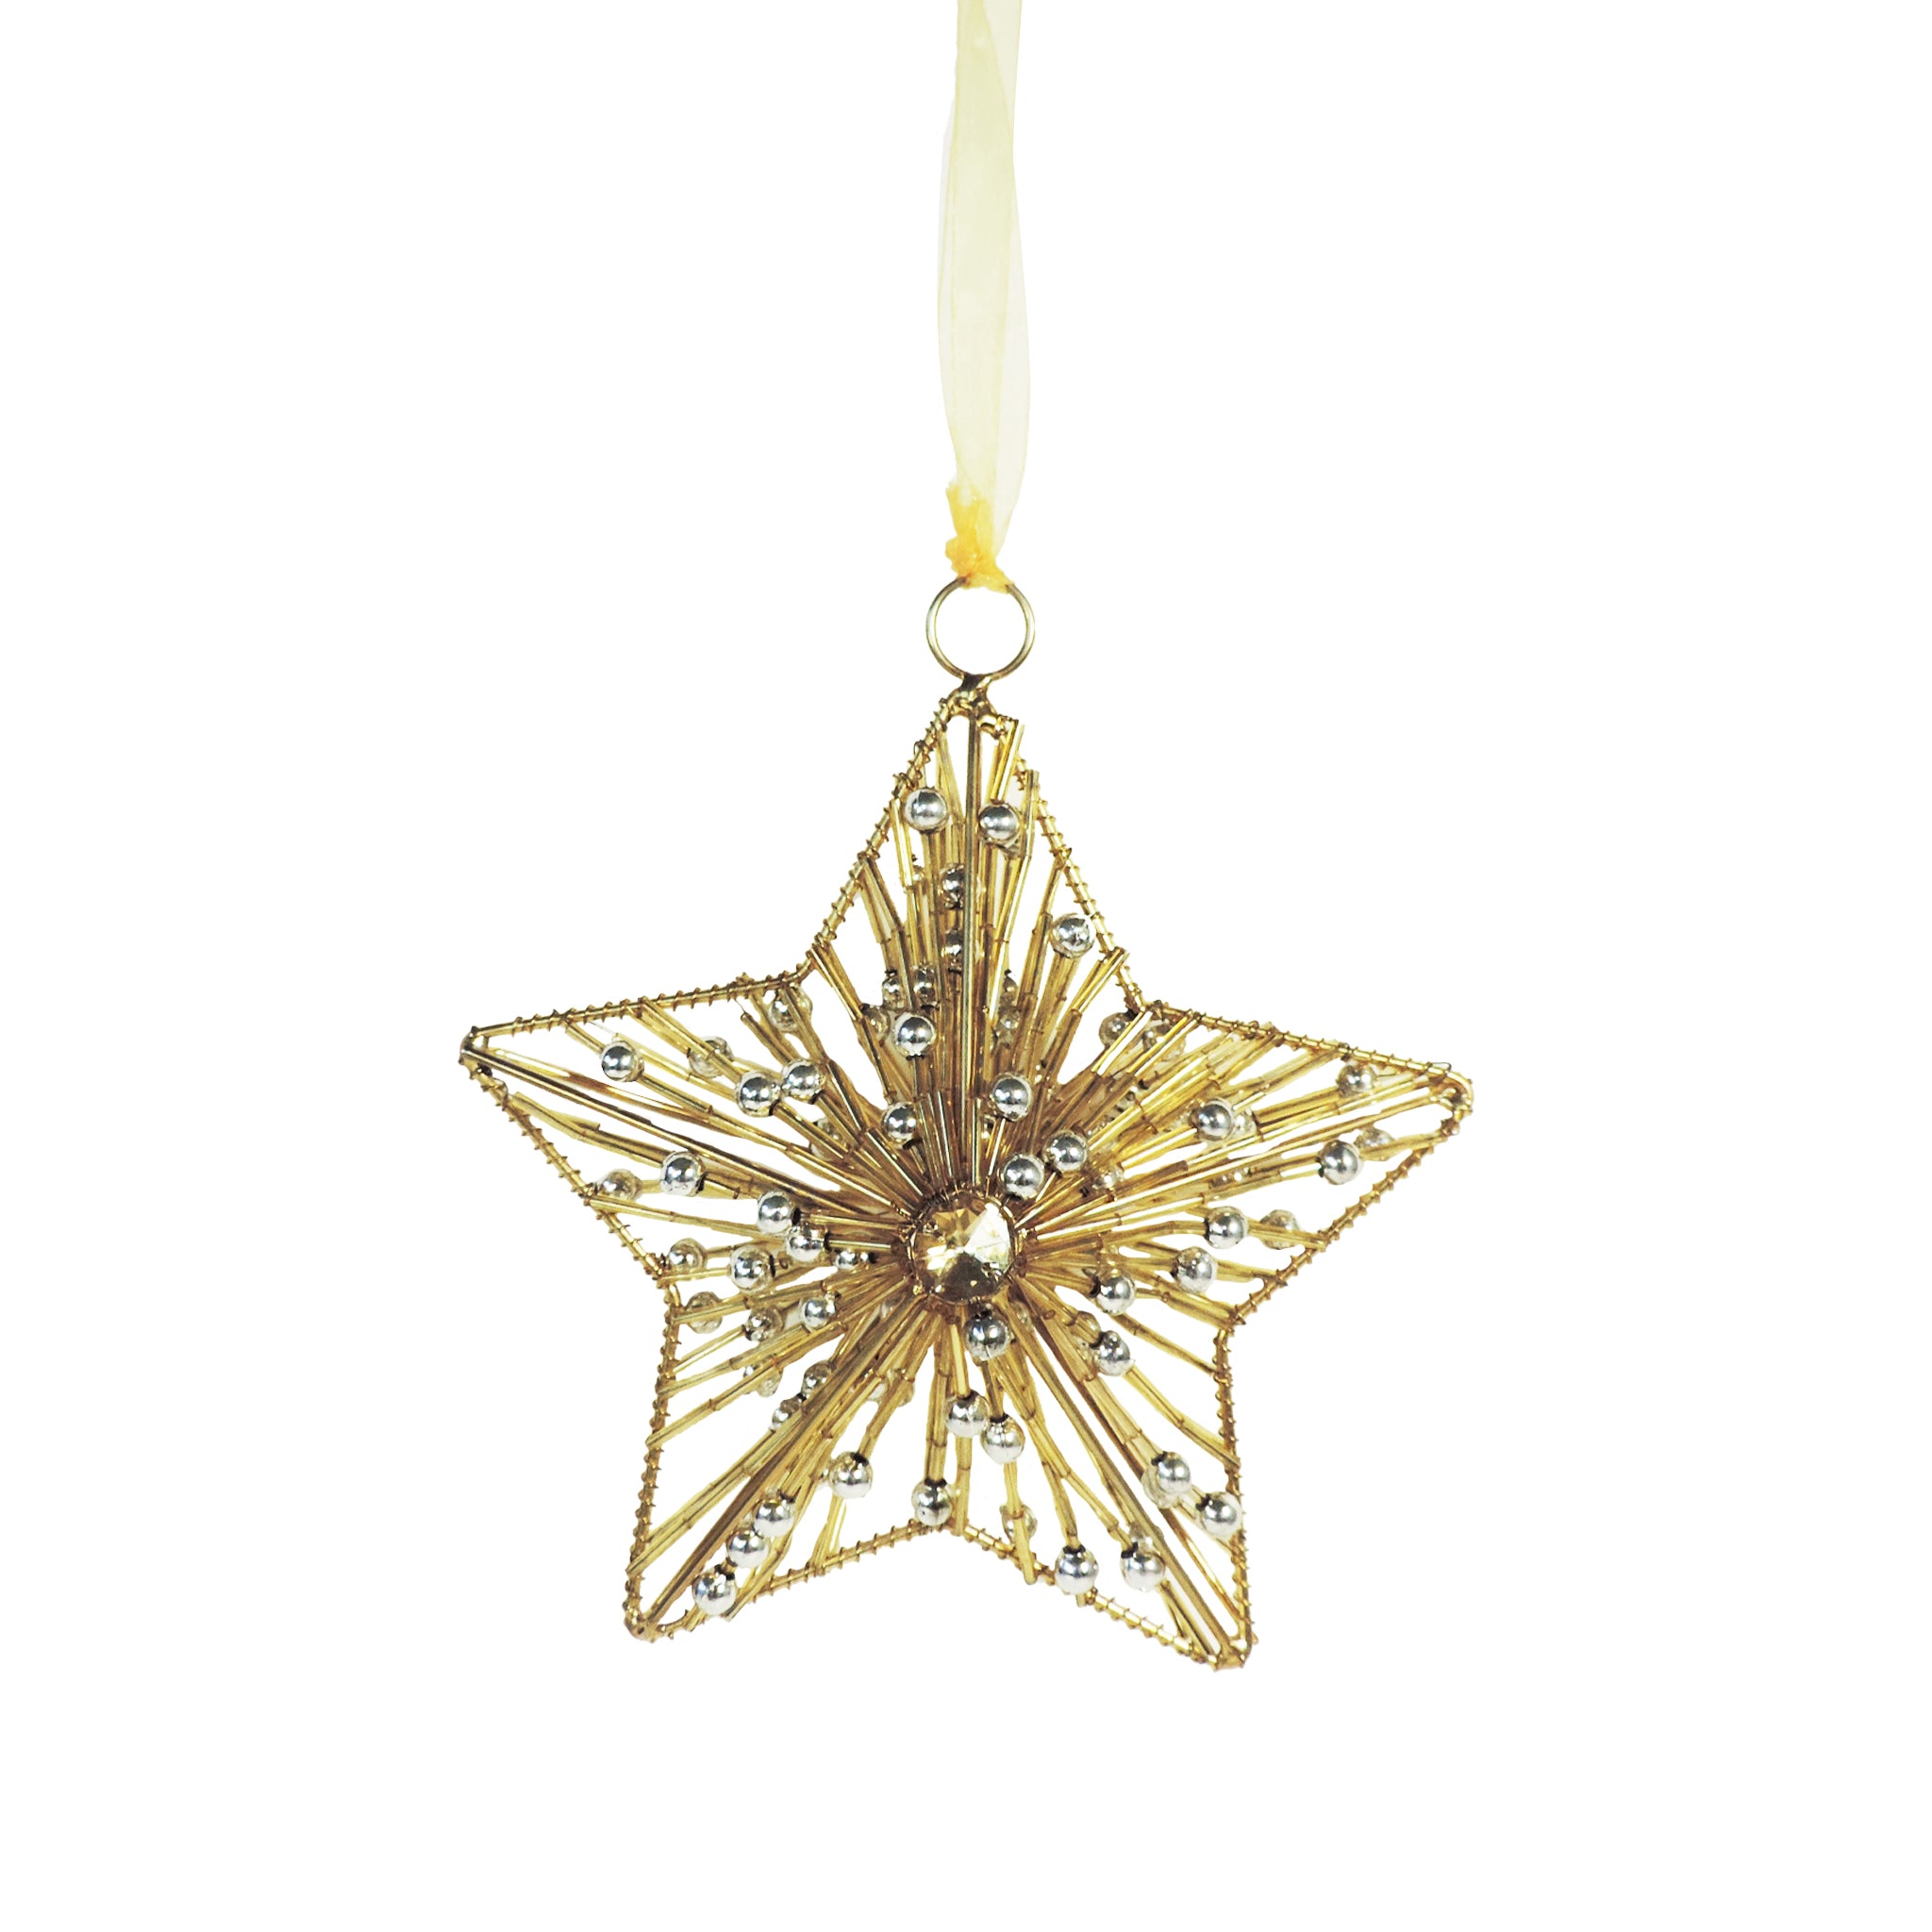 Beaded Holiday Star Hangings / Gold/ 6" / Set of 2